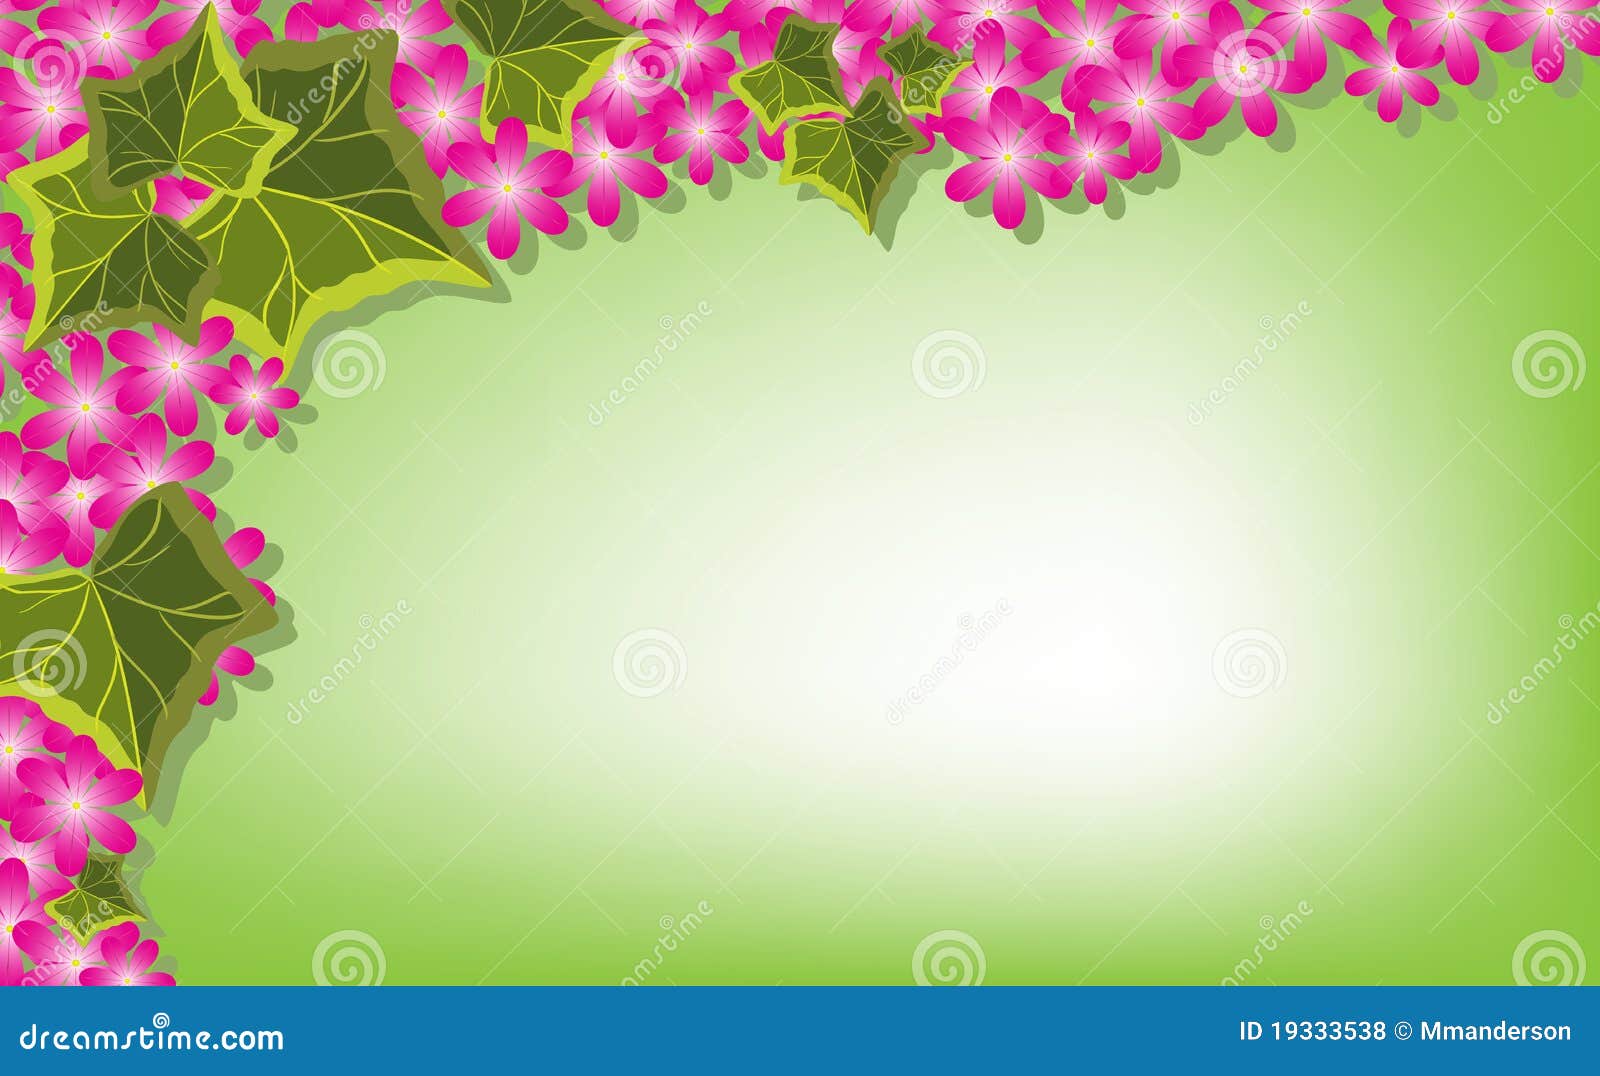 Pink Flowers and Ivy on Green Background Stock Vector - Illustration of  floral, blossom: 19333538